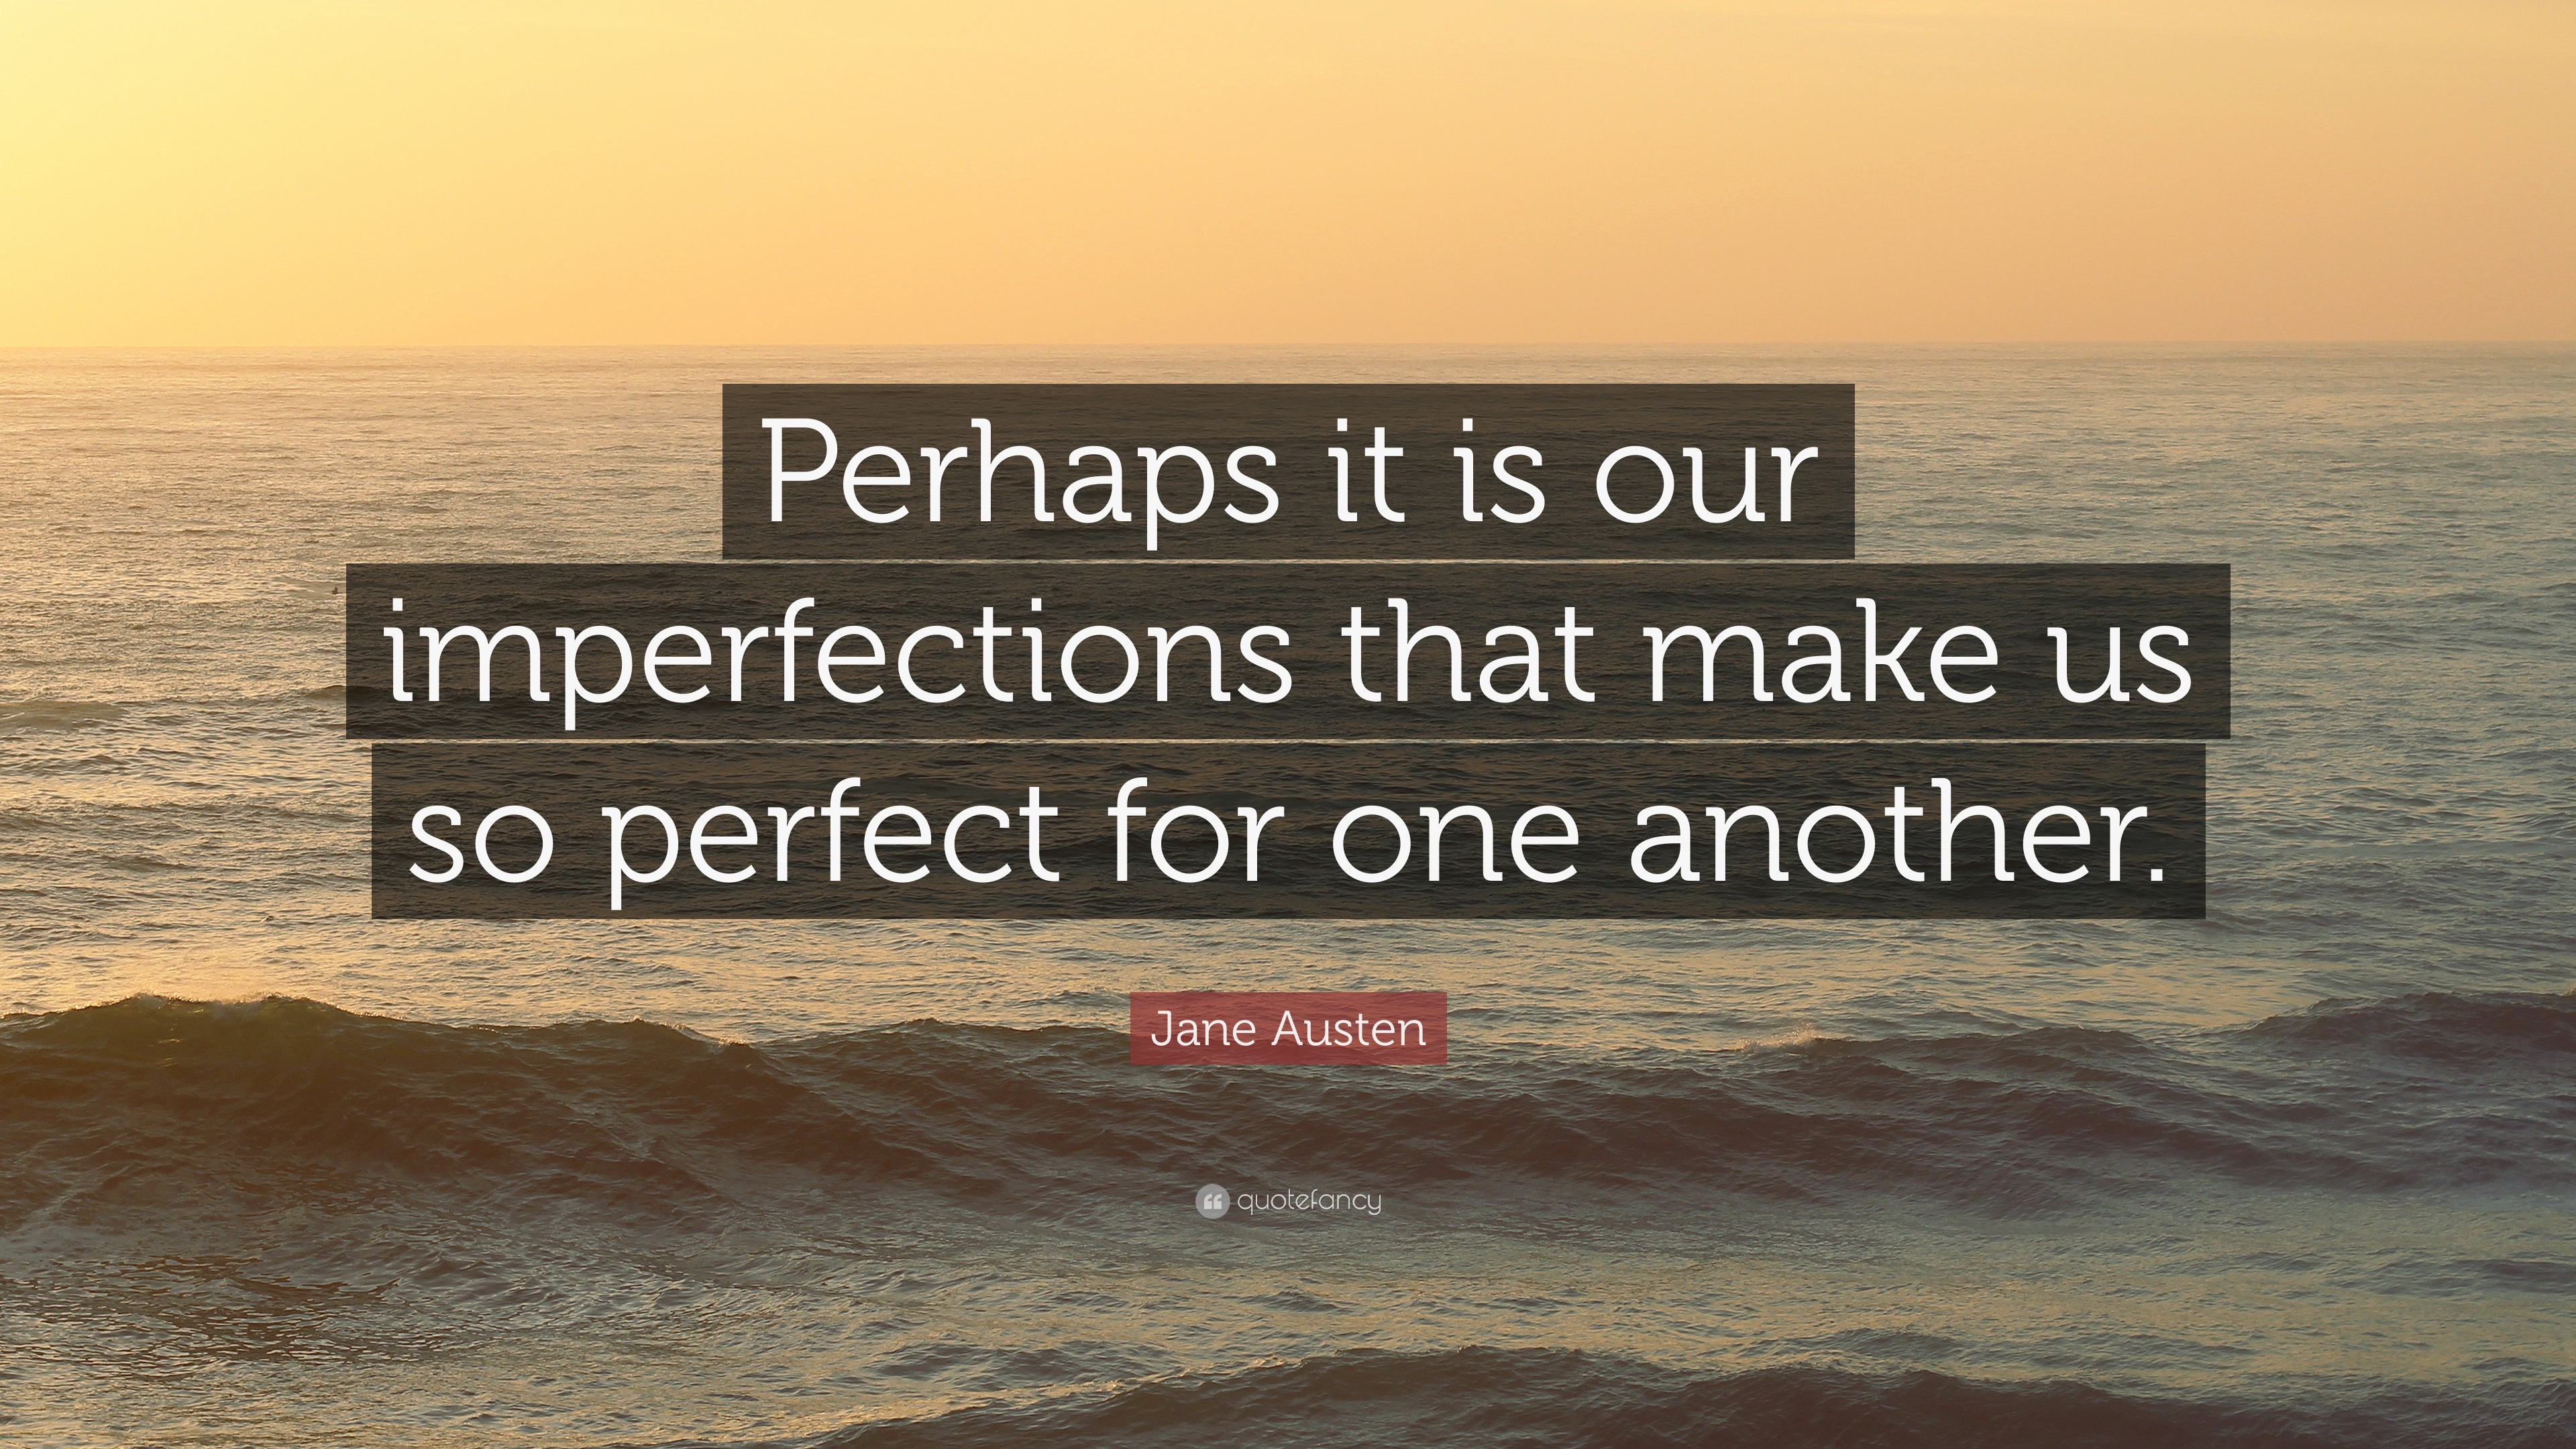 42 Inspirational Imperfection Quotes With Images - vrogue.co